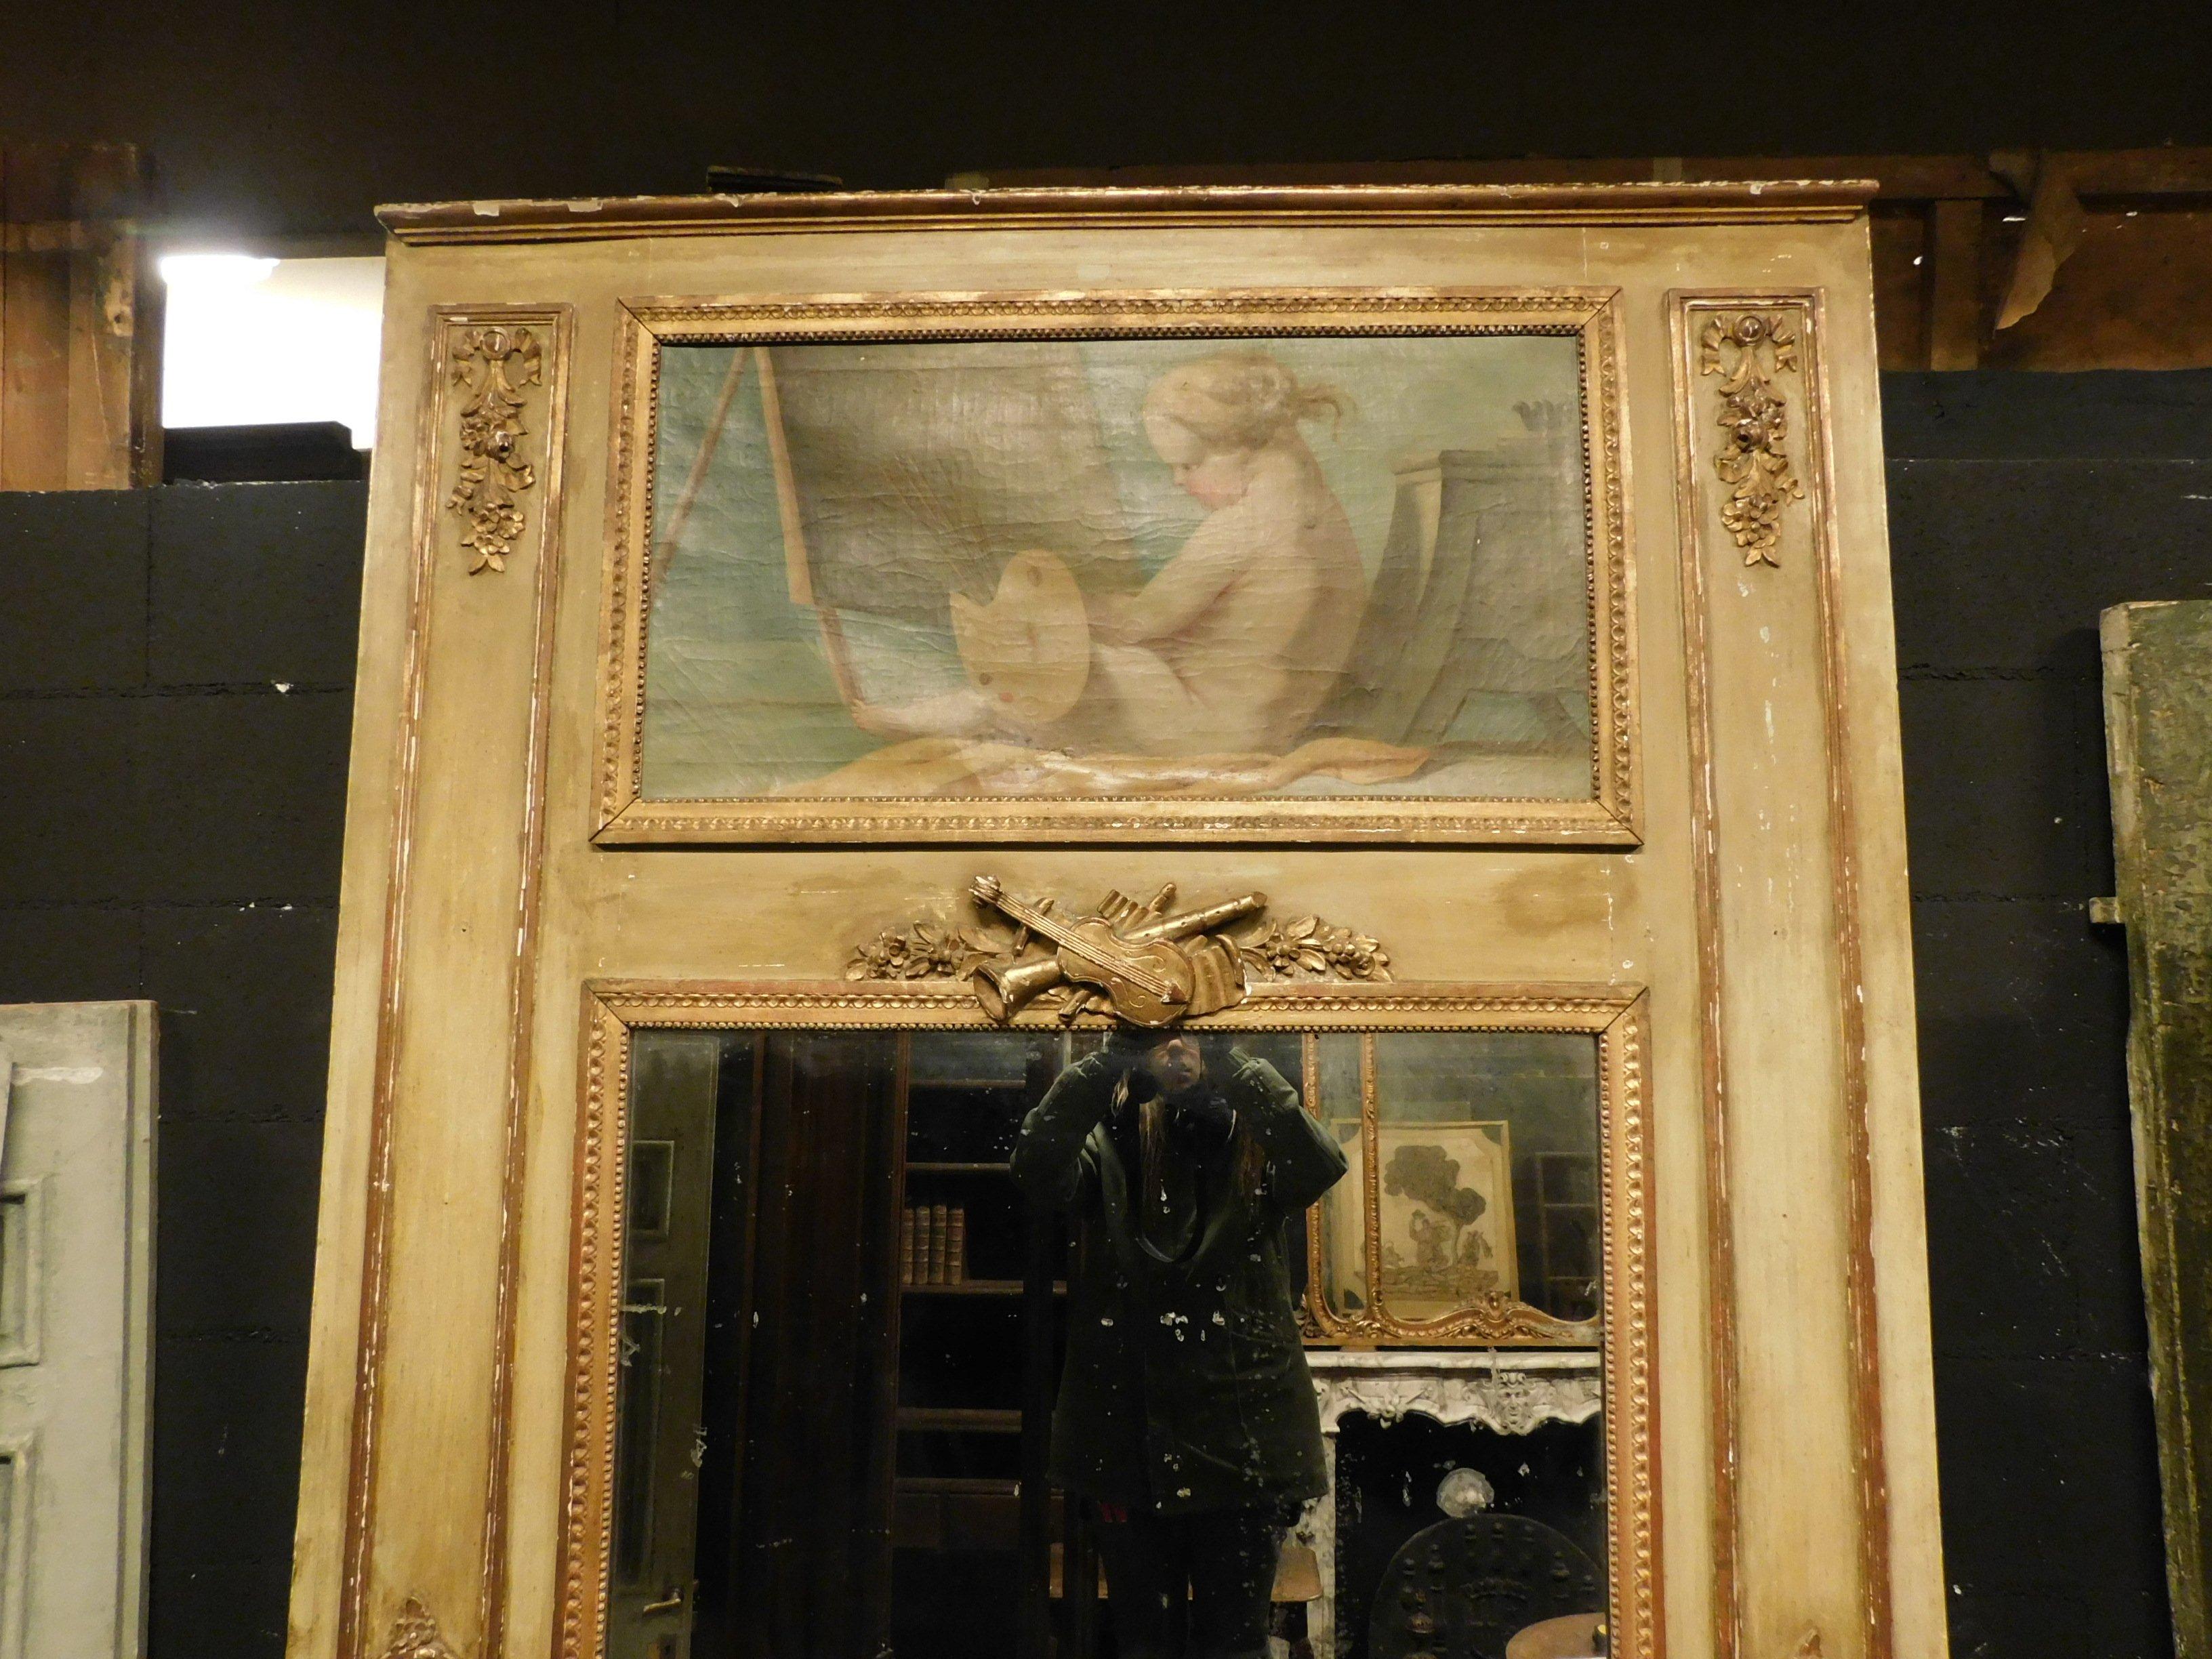 Hand-Painted Antique Gilded Louis XVI Mirror with Painting, Inspired by Art, France, 1700